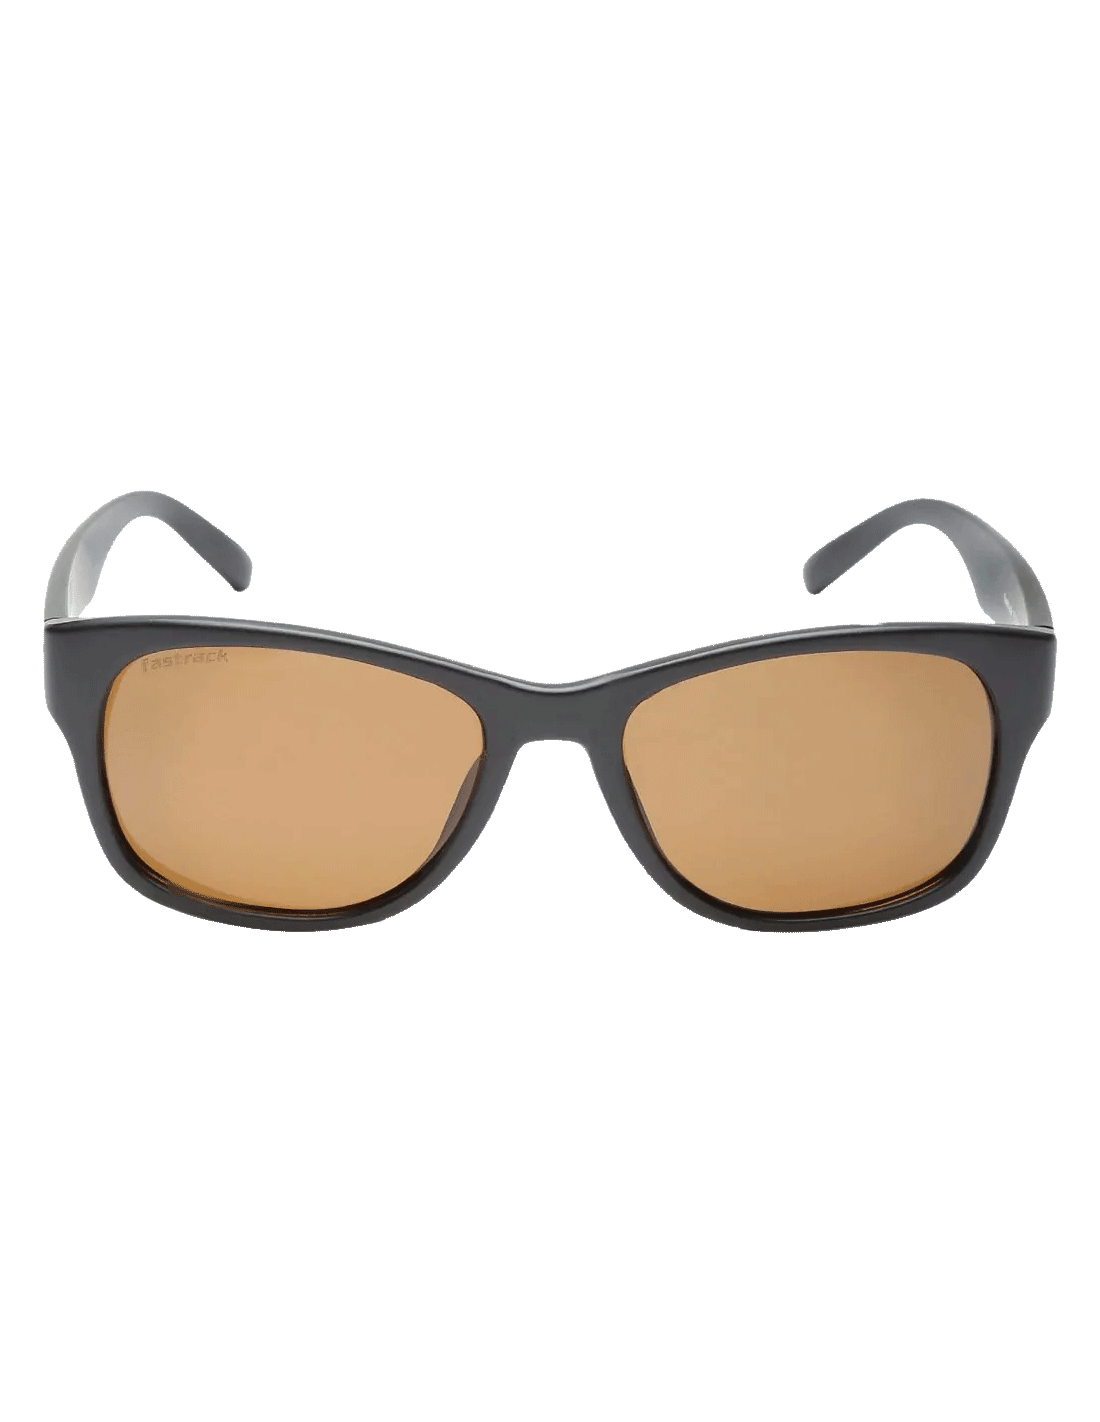 M50 Oversized Large Sunglasses by Silver Lining | Silver Lining Opticians